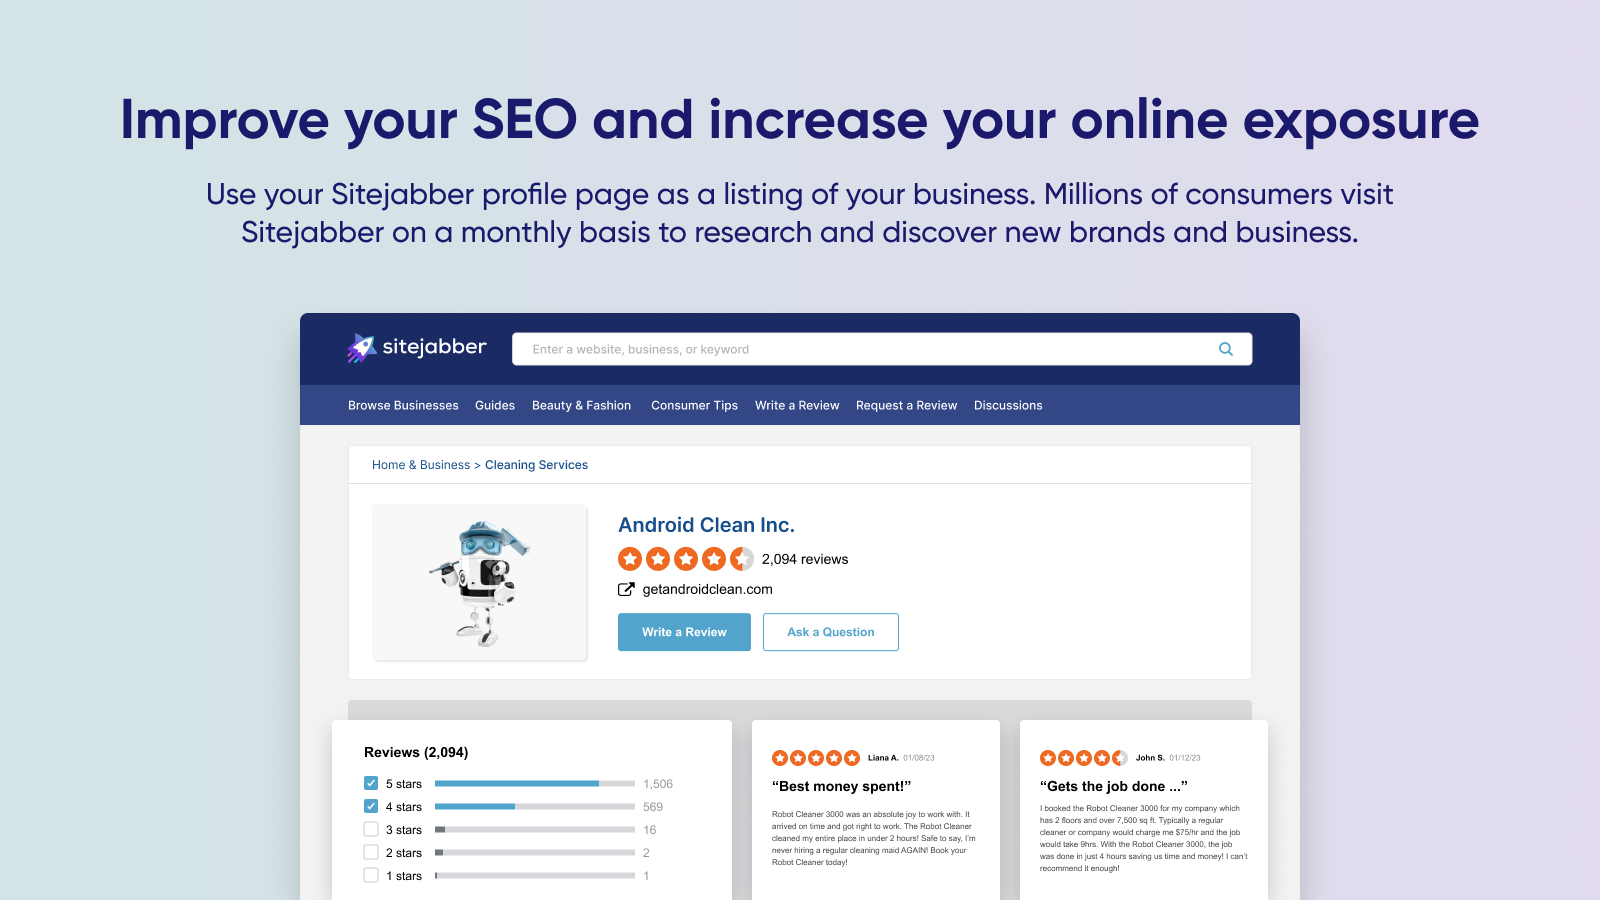 Improve your SEO and increase your online exposure